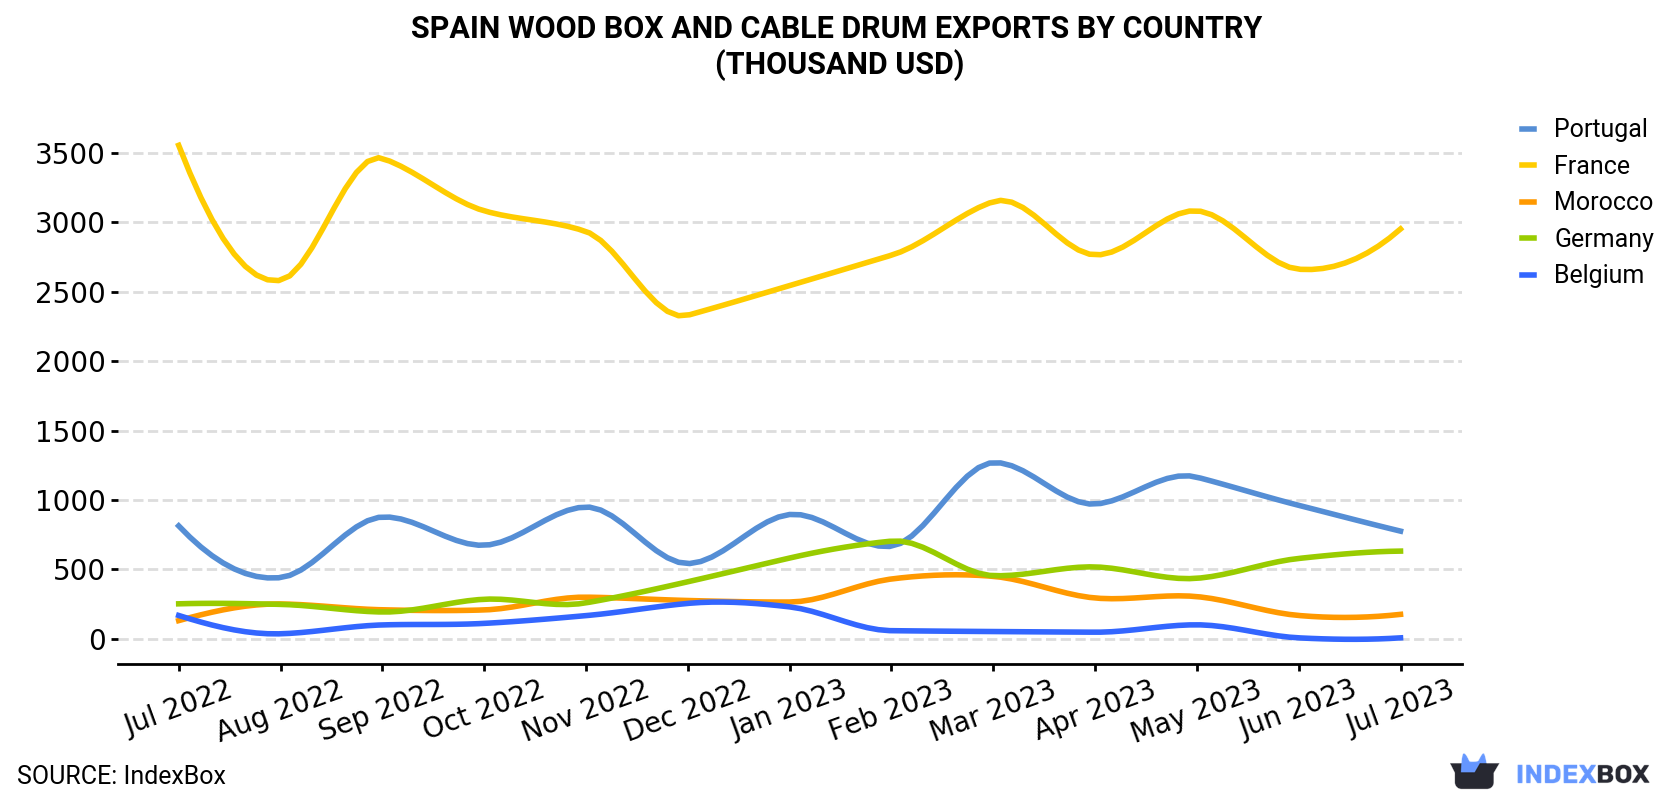 Spain Wood Box and Cable Drum Exports By Country (Thousand USD)